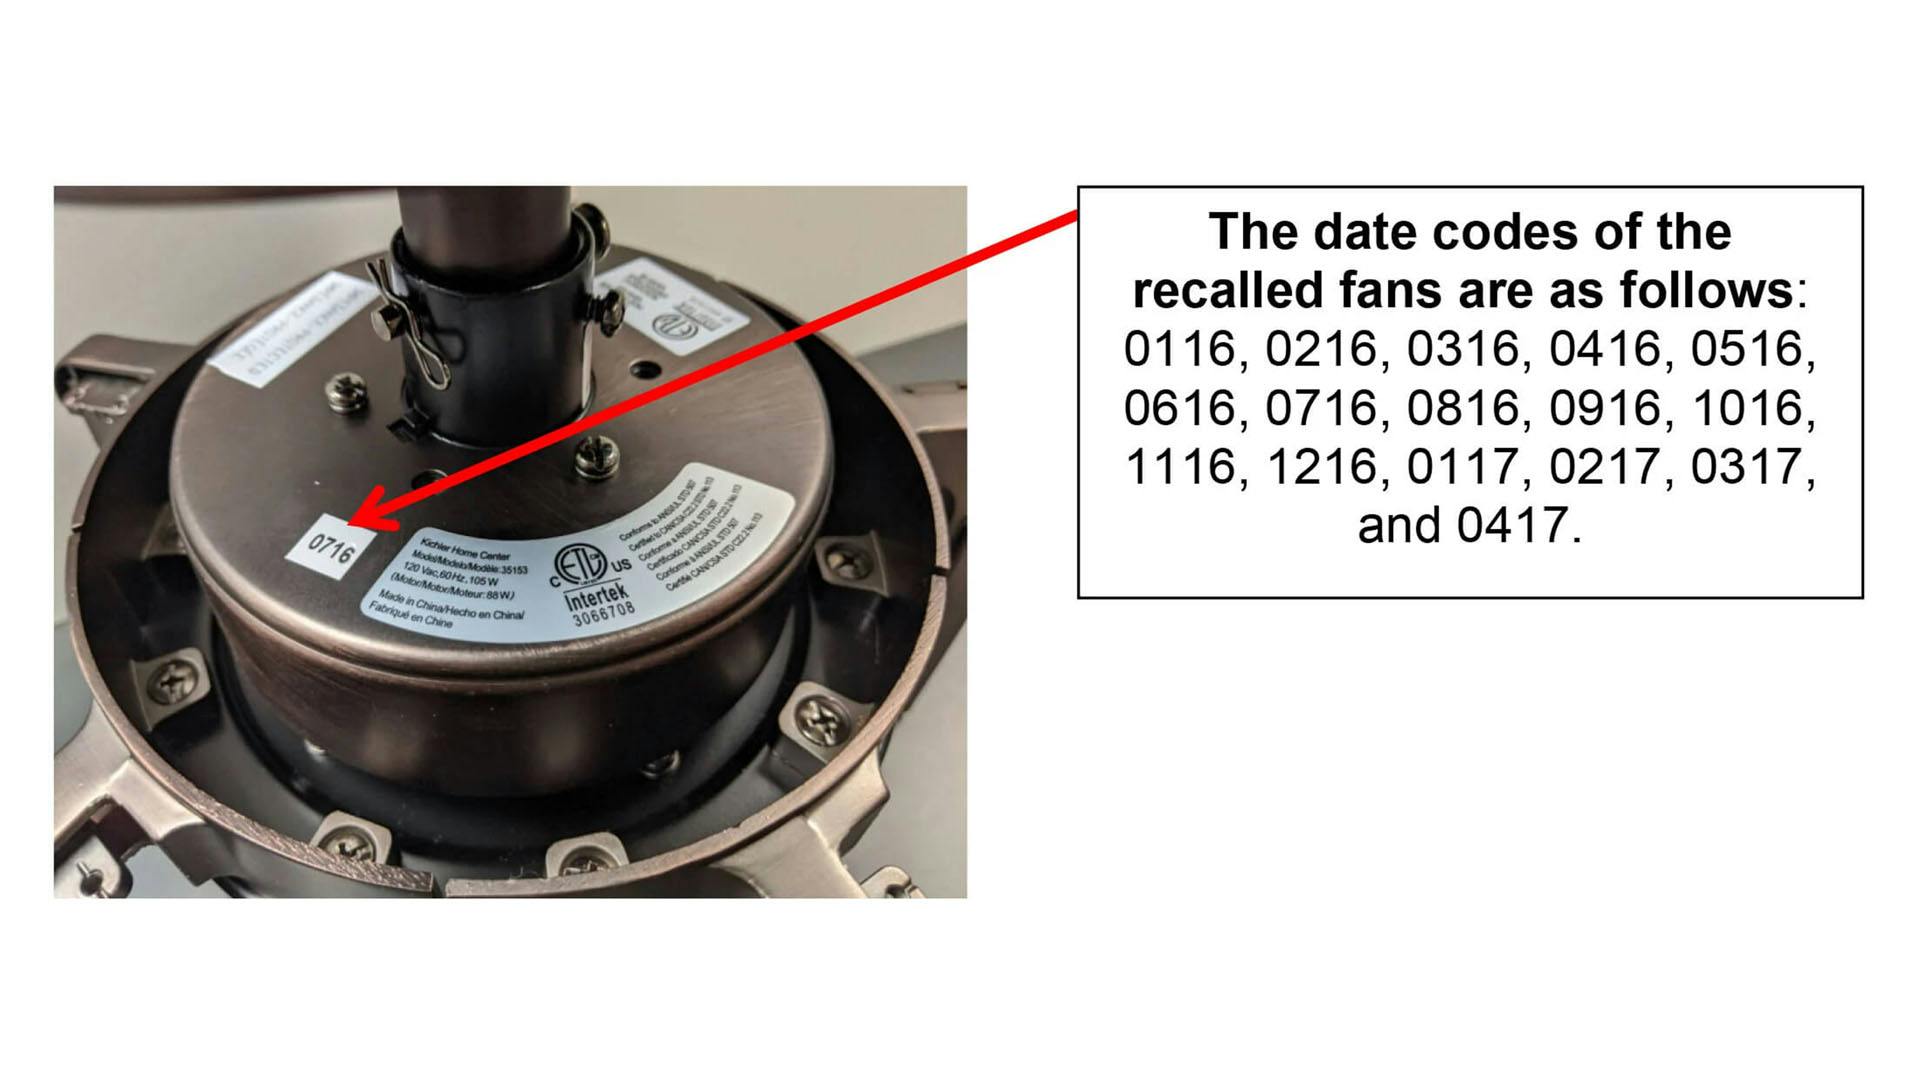 Product detail of date codes.